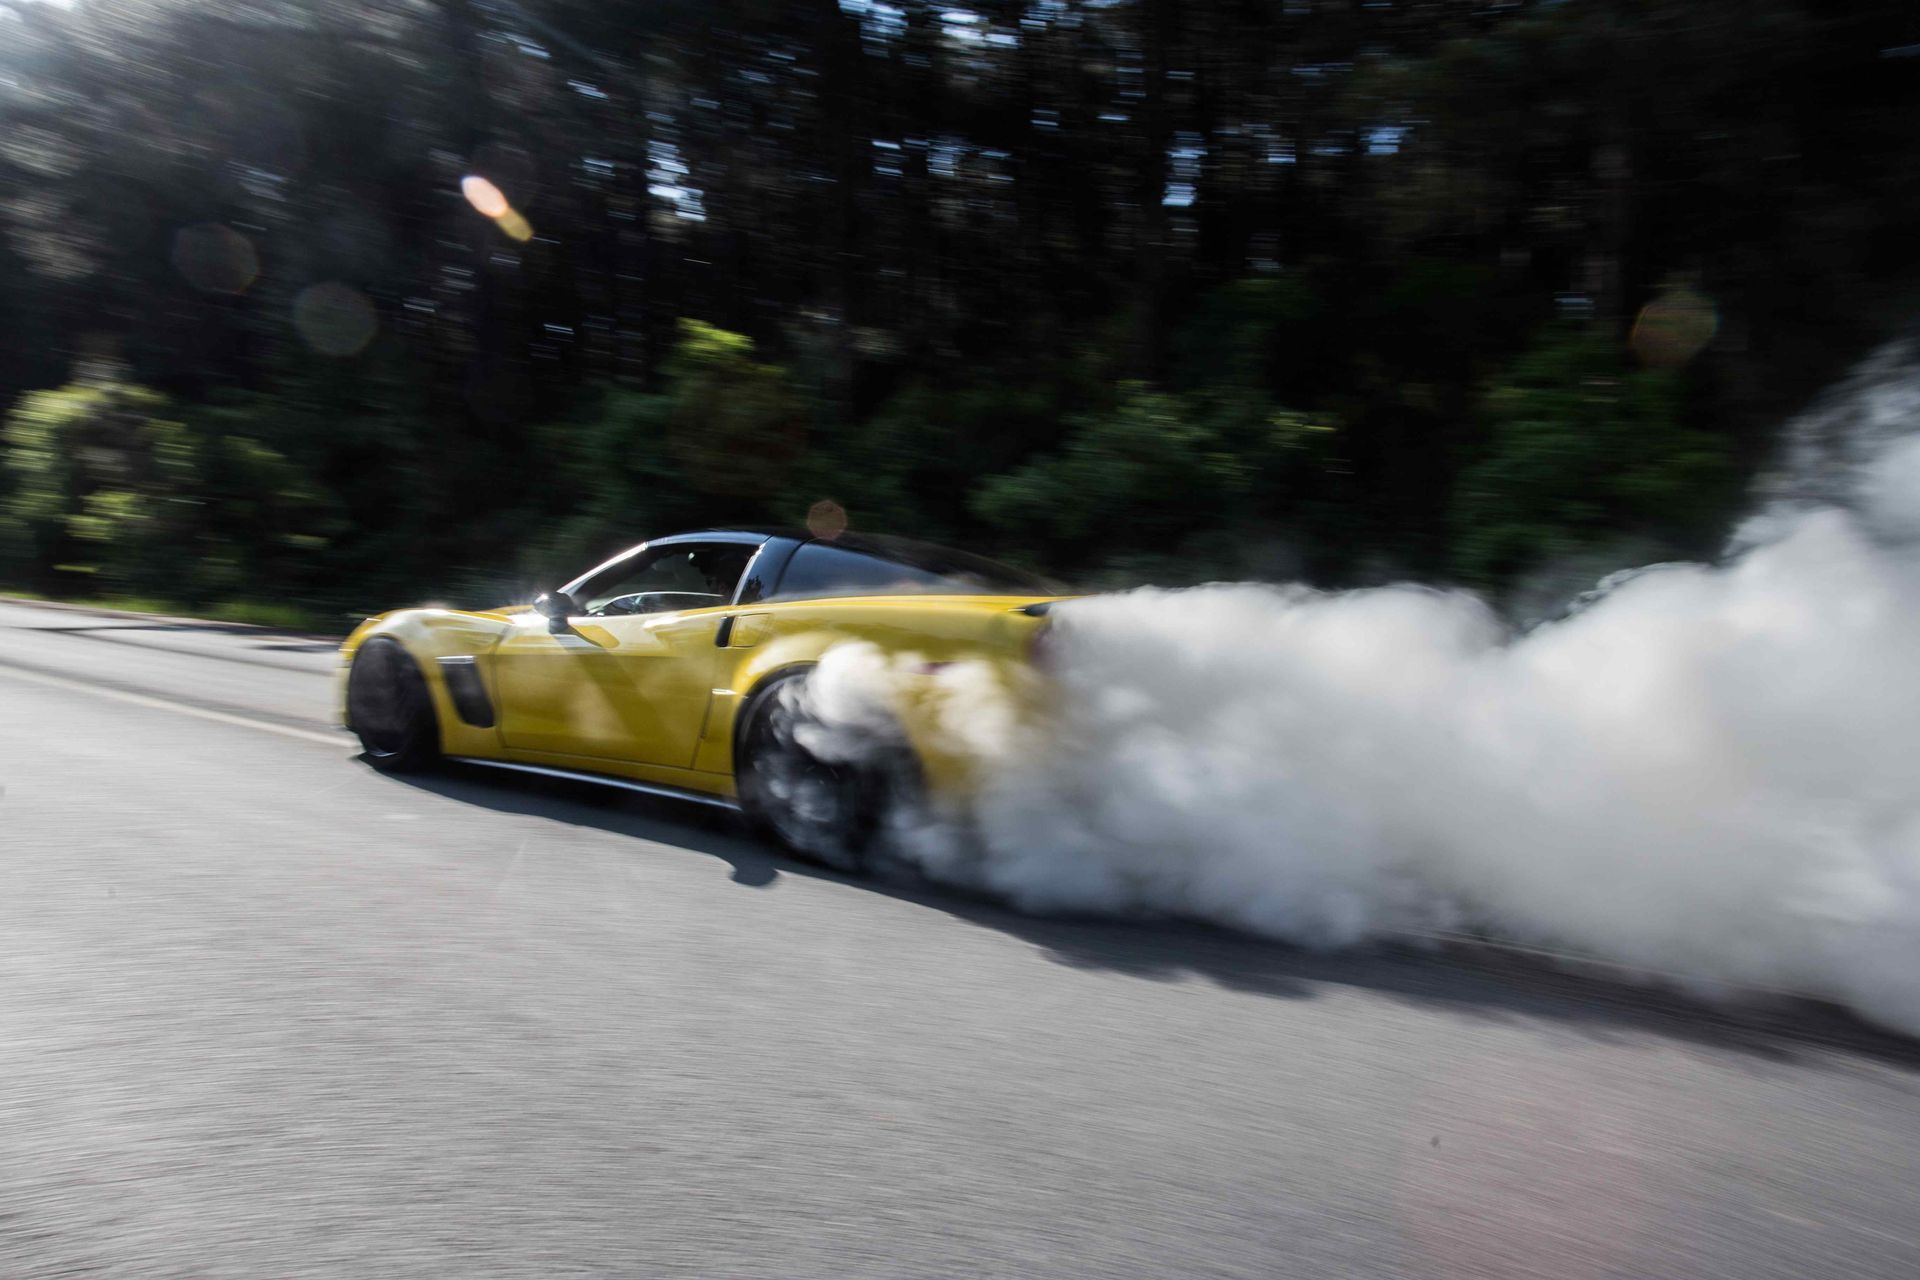 corvette doing a burnout and creating lots of tire smoke